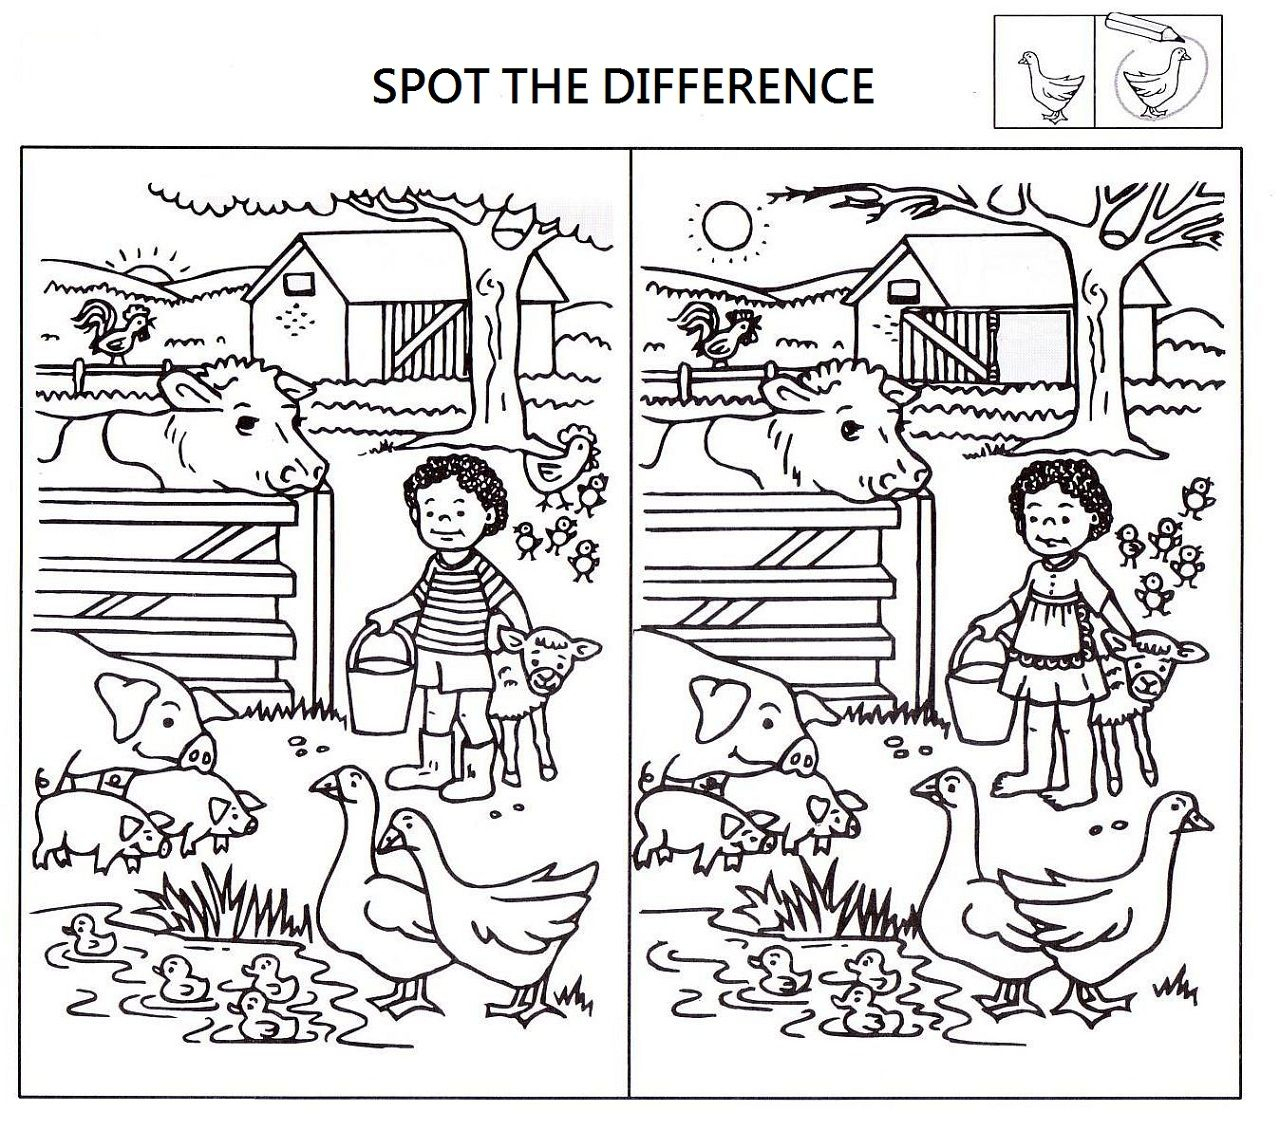 Spot The Difference Puzzle | Spot The Difference Kids, Find The - Spot The Difference For Kids